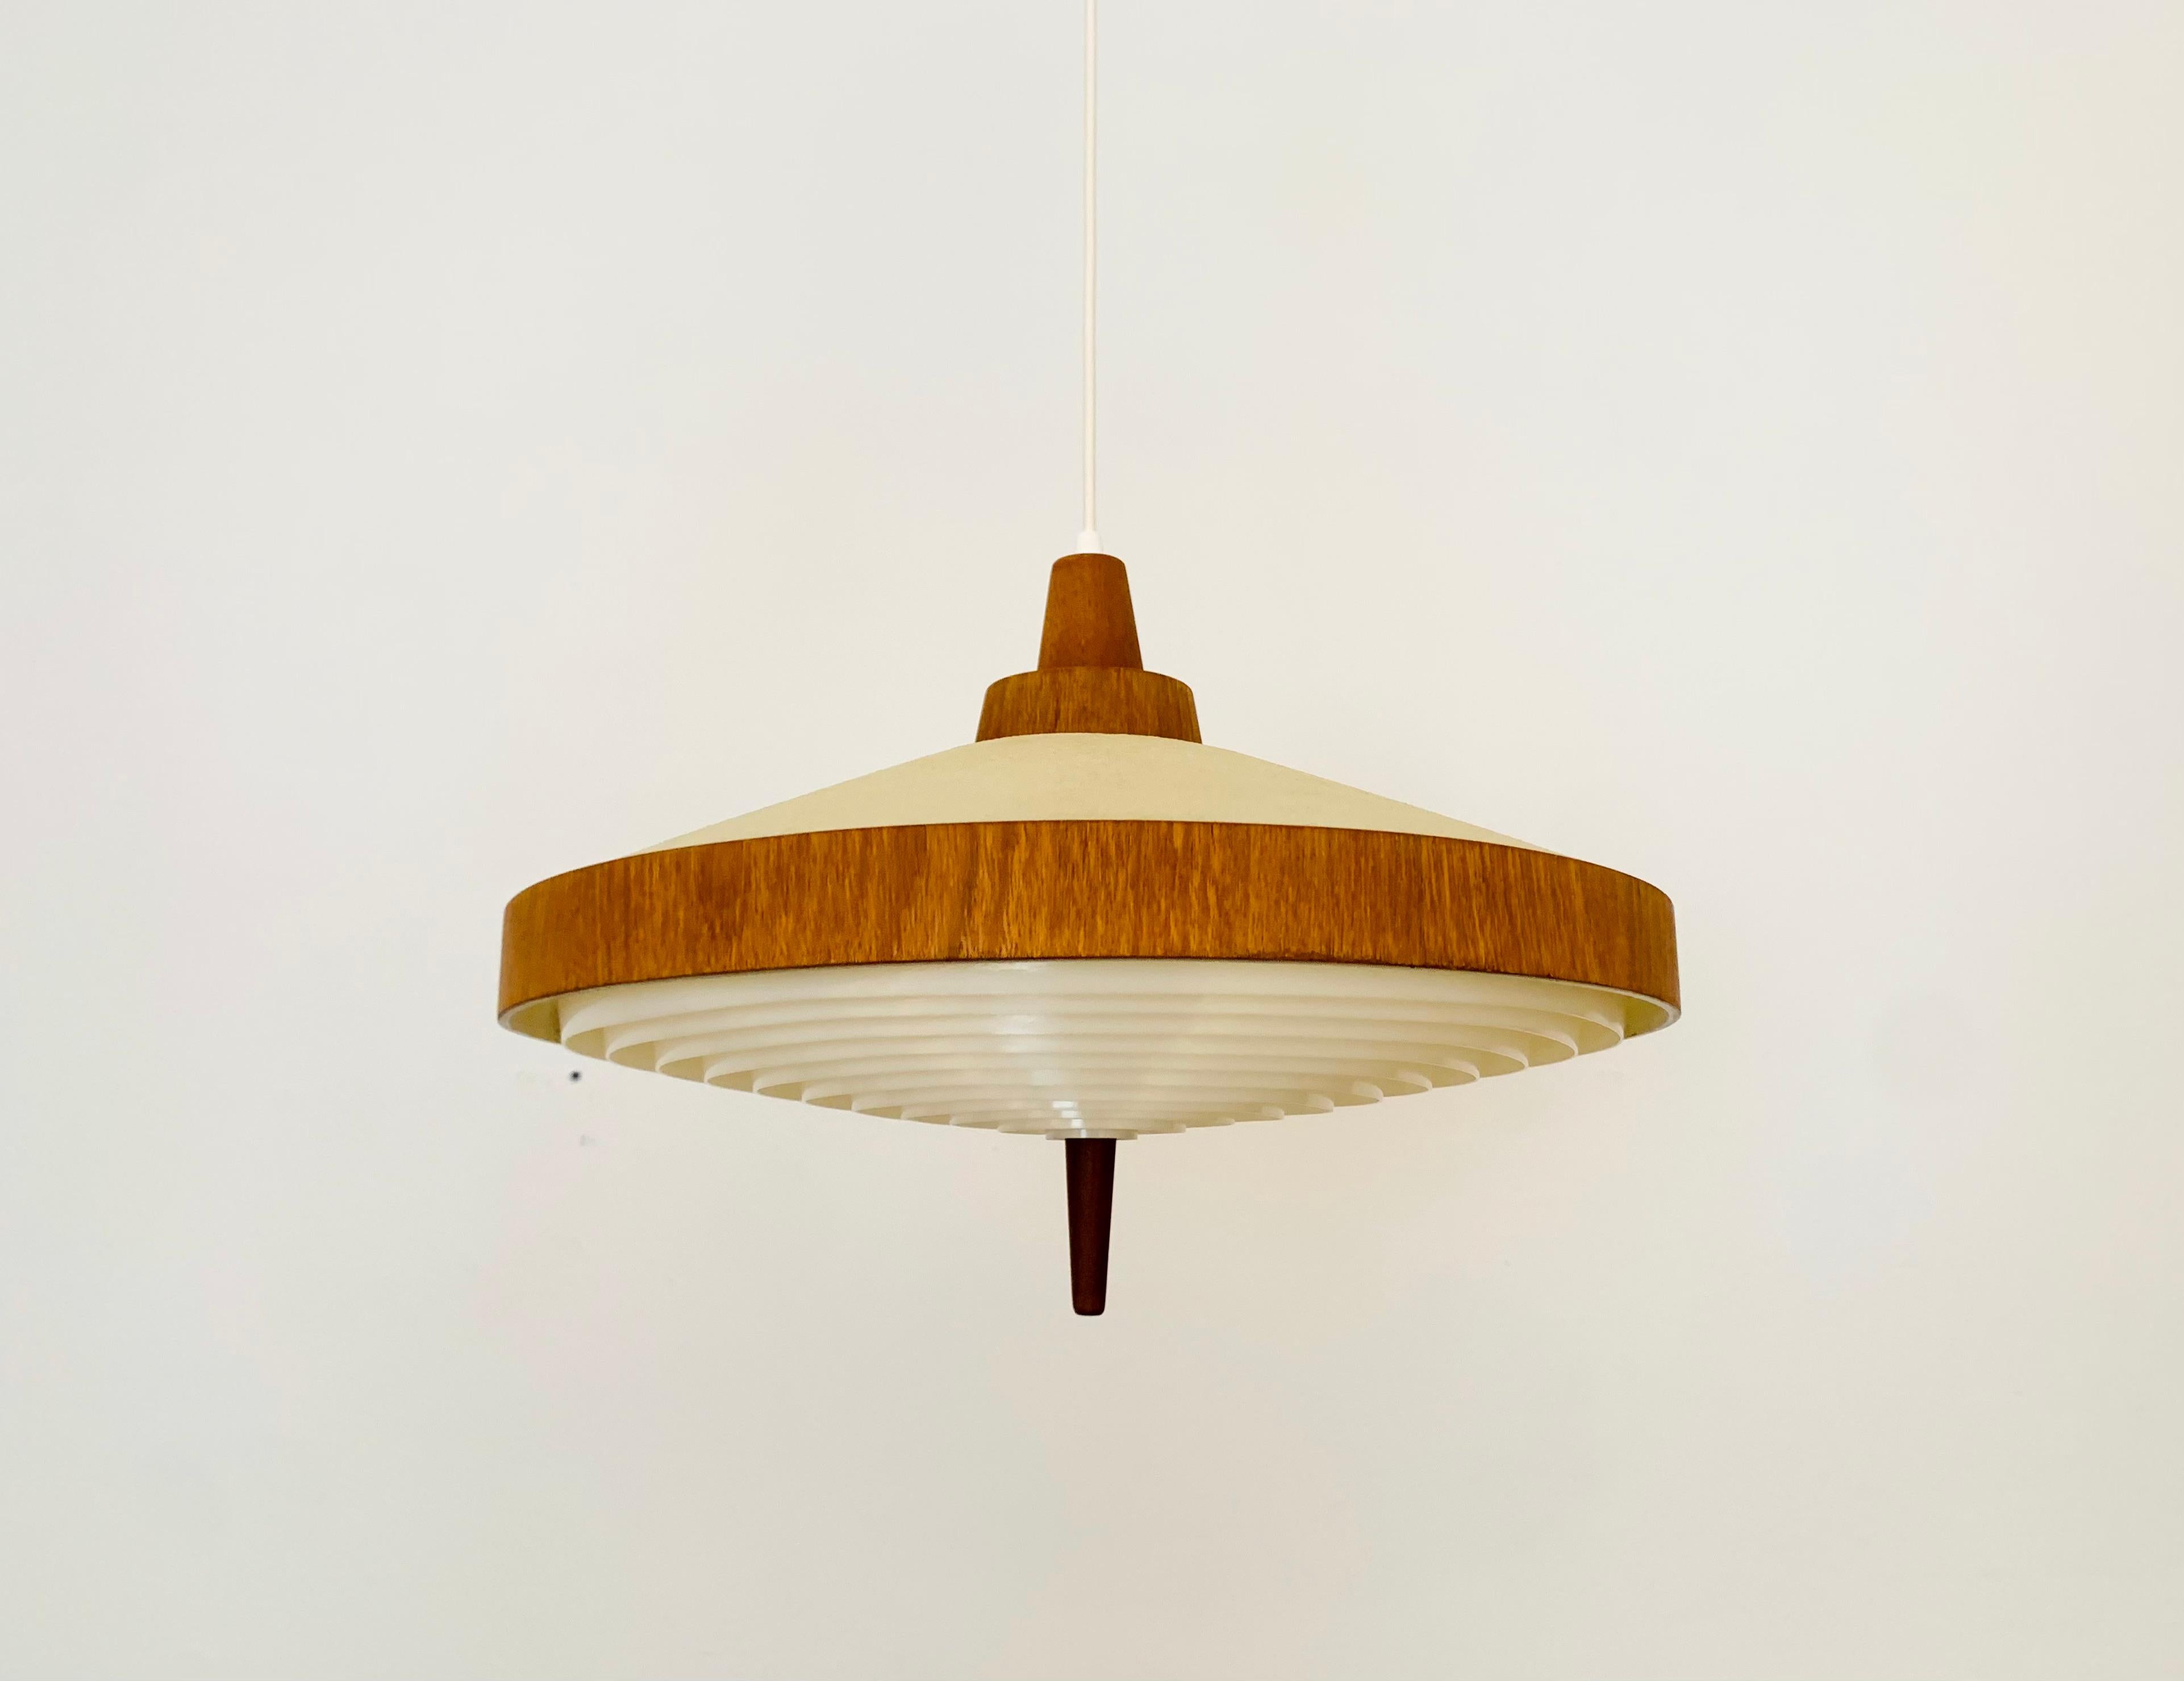 Exceptionally beautiful pendant lamp from the 1960s.
The design is very unusual.
The shape and materials create a warm and very pleasant light.

Condition:

Very good vintage condition with slight signs of age-related wear.
The plastic parts are in